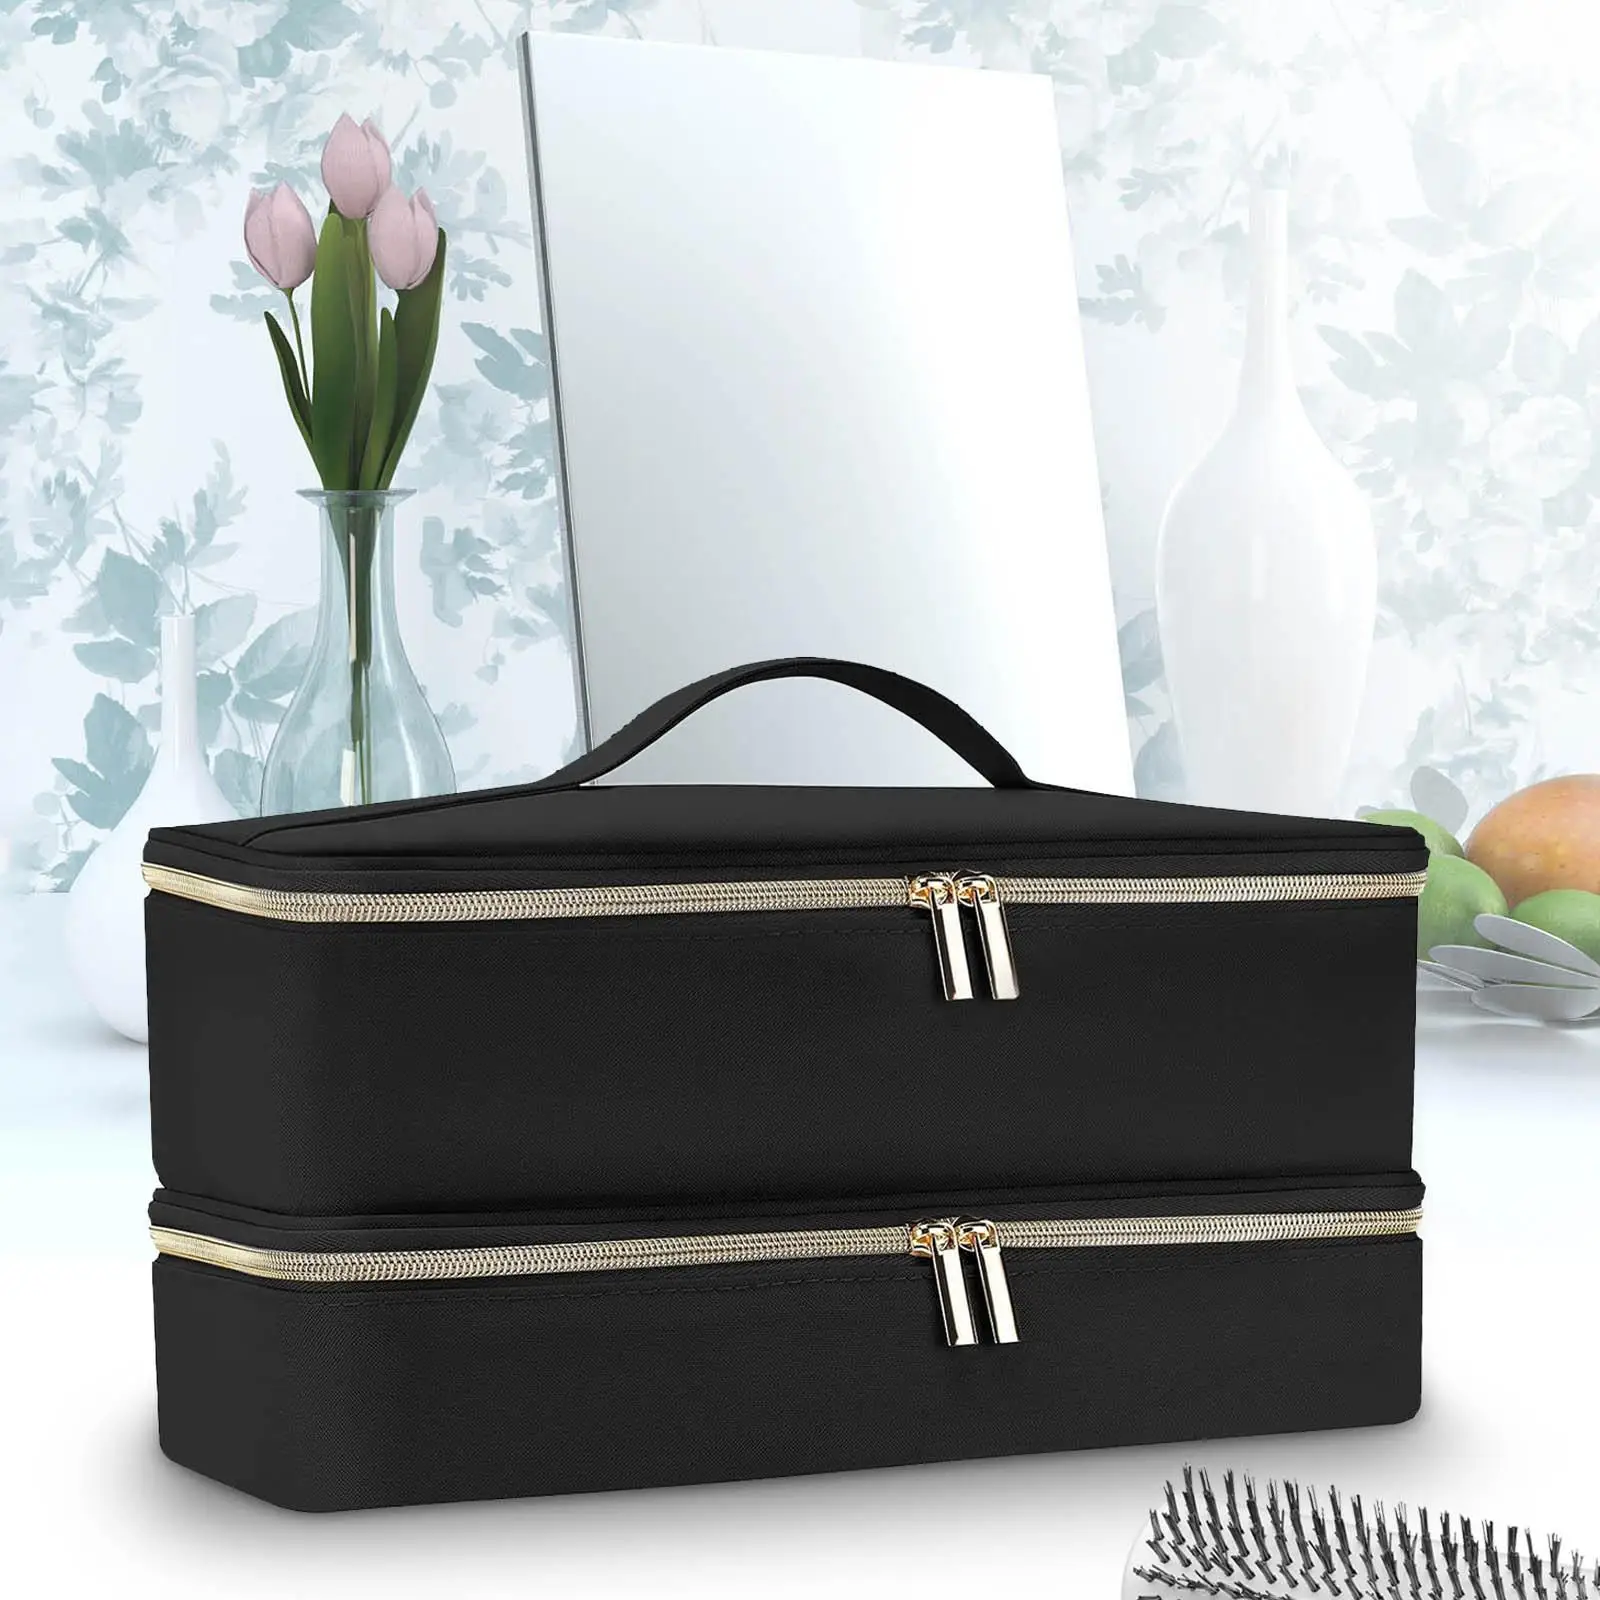 Hair Dryer Storage Bag Portable Double Layer Large Capacity Travel Case Storage Case for Bathroom Home Business Trip Travel